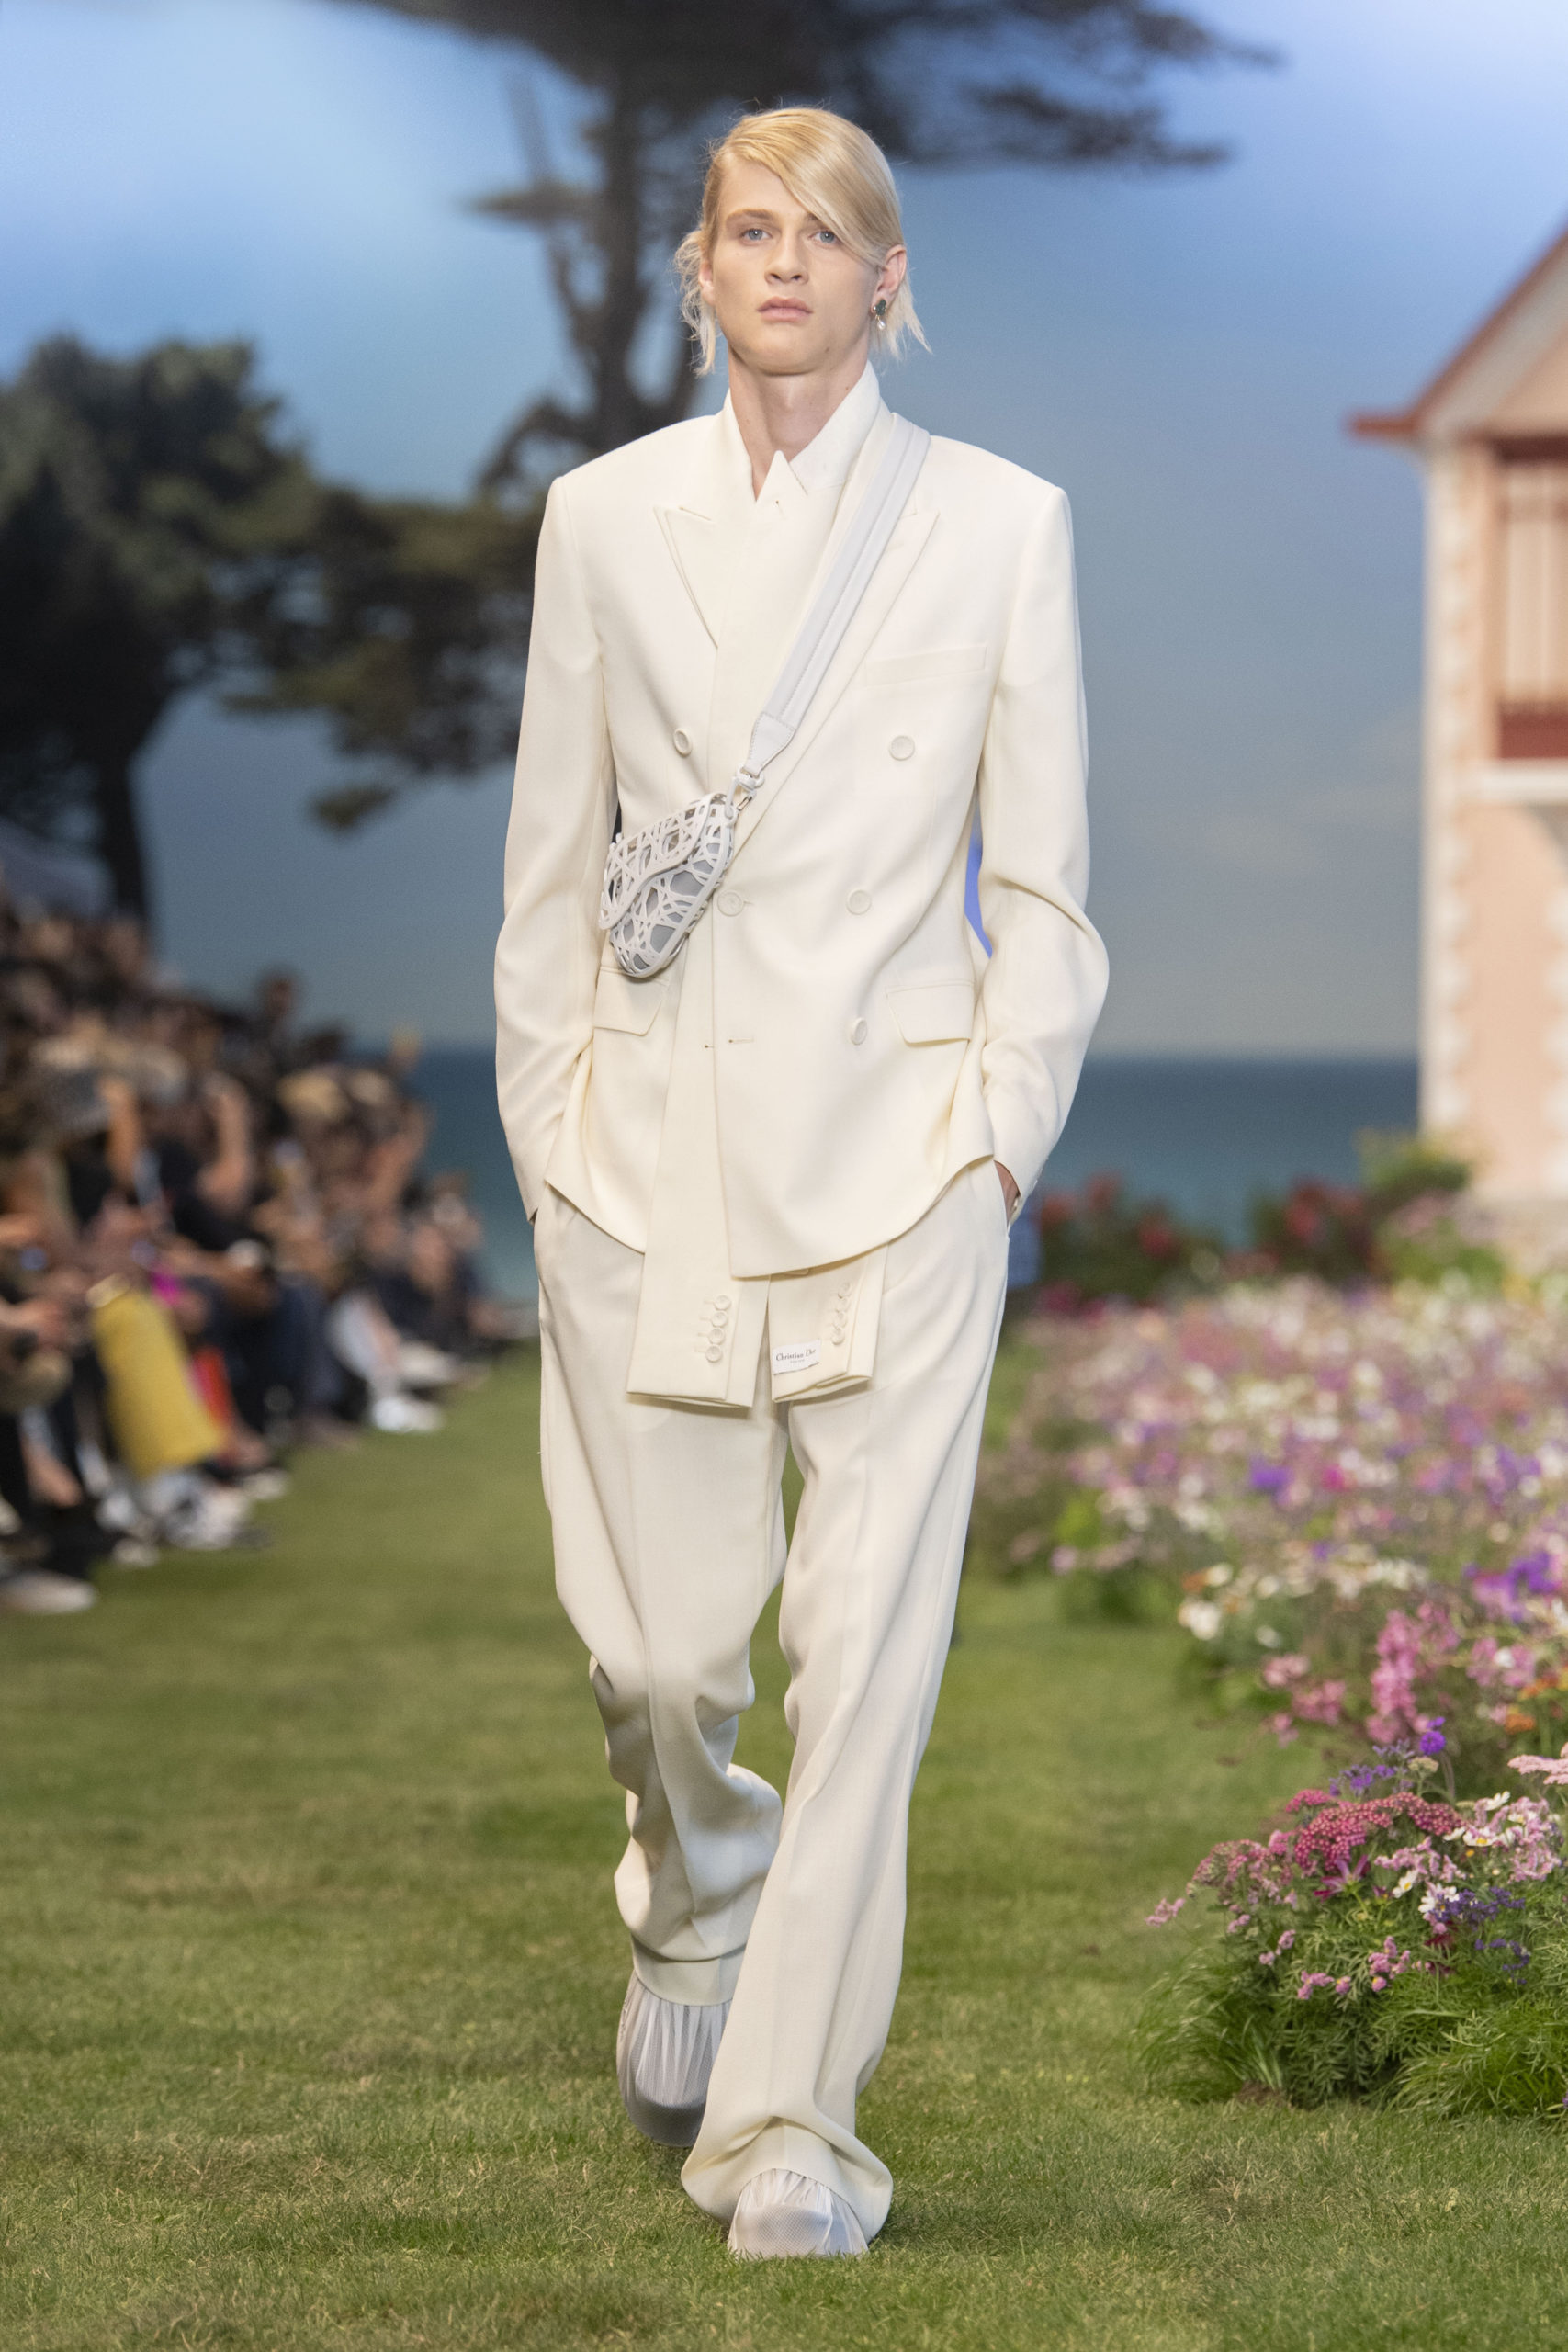 Kim Jones Unifies Art And Fashion In Dior’s Latest Menswear Collection